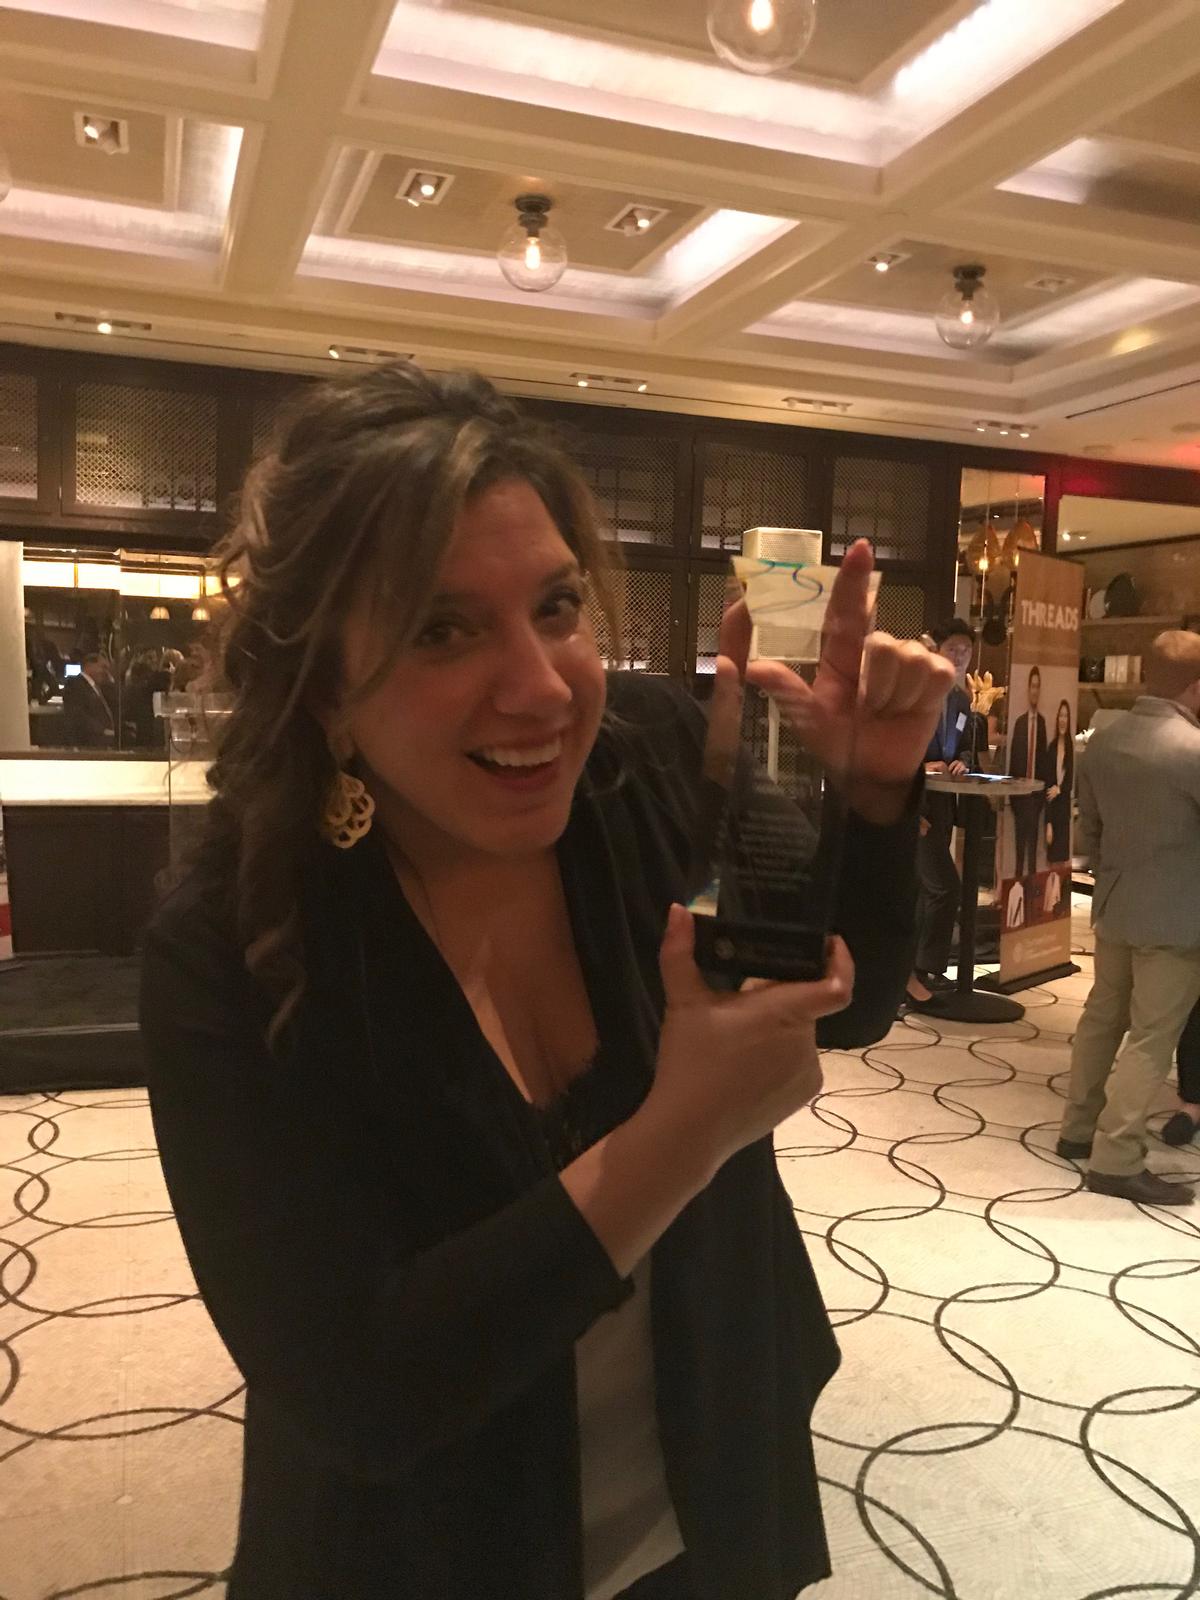 Kyricos was honoured by Cornell University as the 2019 MMH (Master of Management degree in Hospitality) Outstanding Alumna of the Year earlier this week in New York City / Mia Kyricos